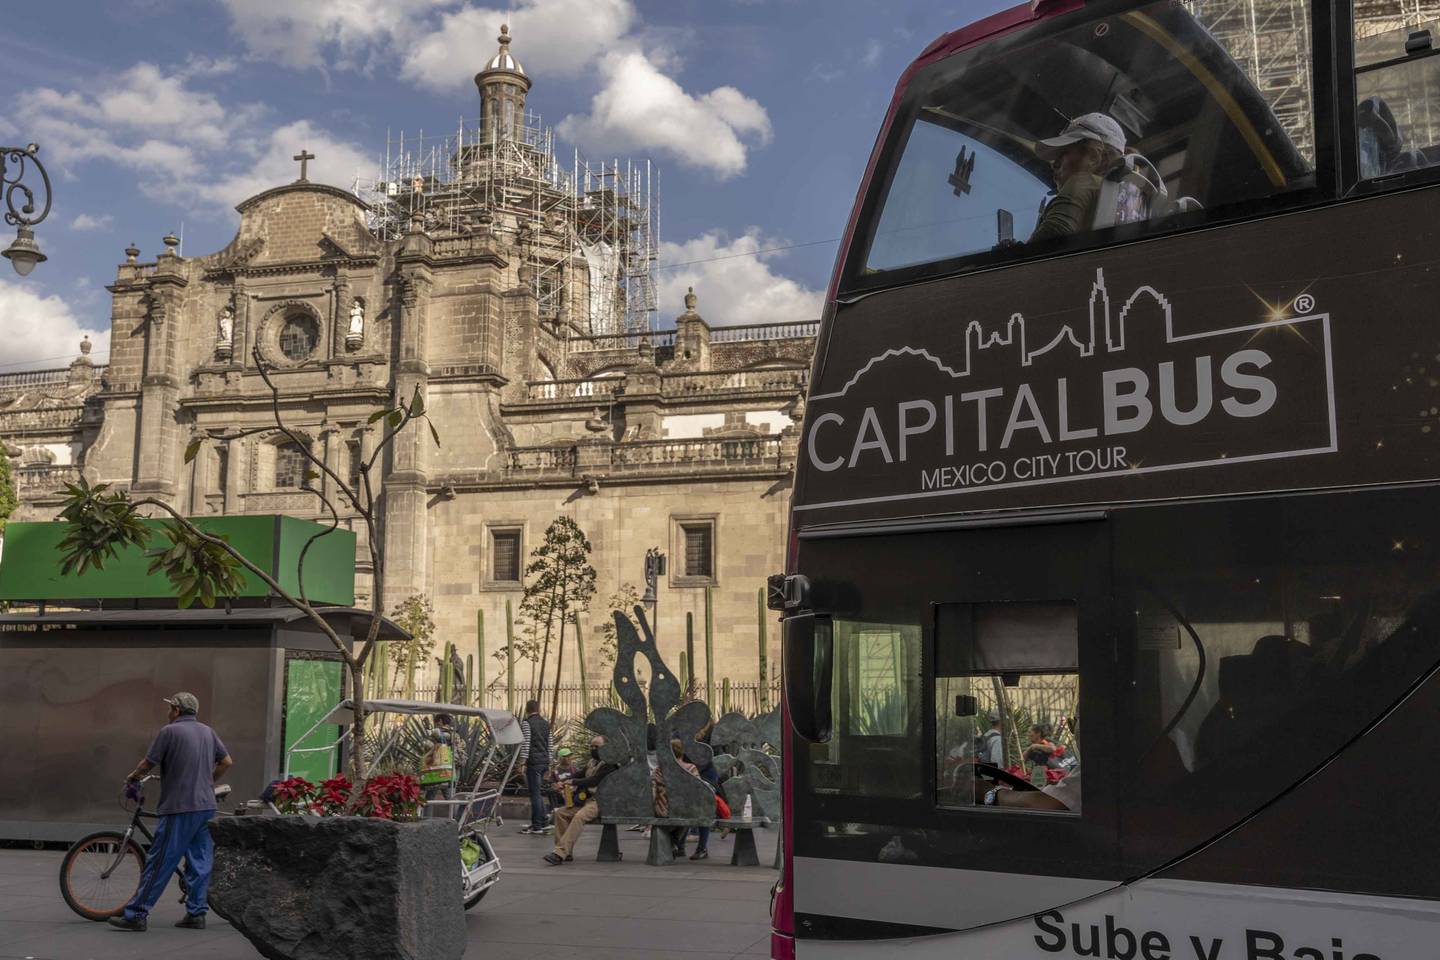 A double-decker bus in Mexico City.Photo: Bloomberg